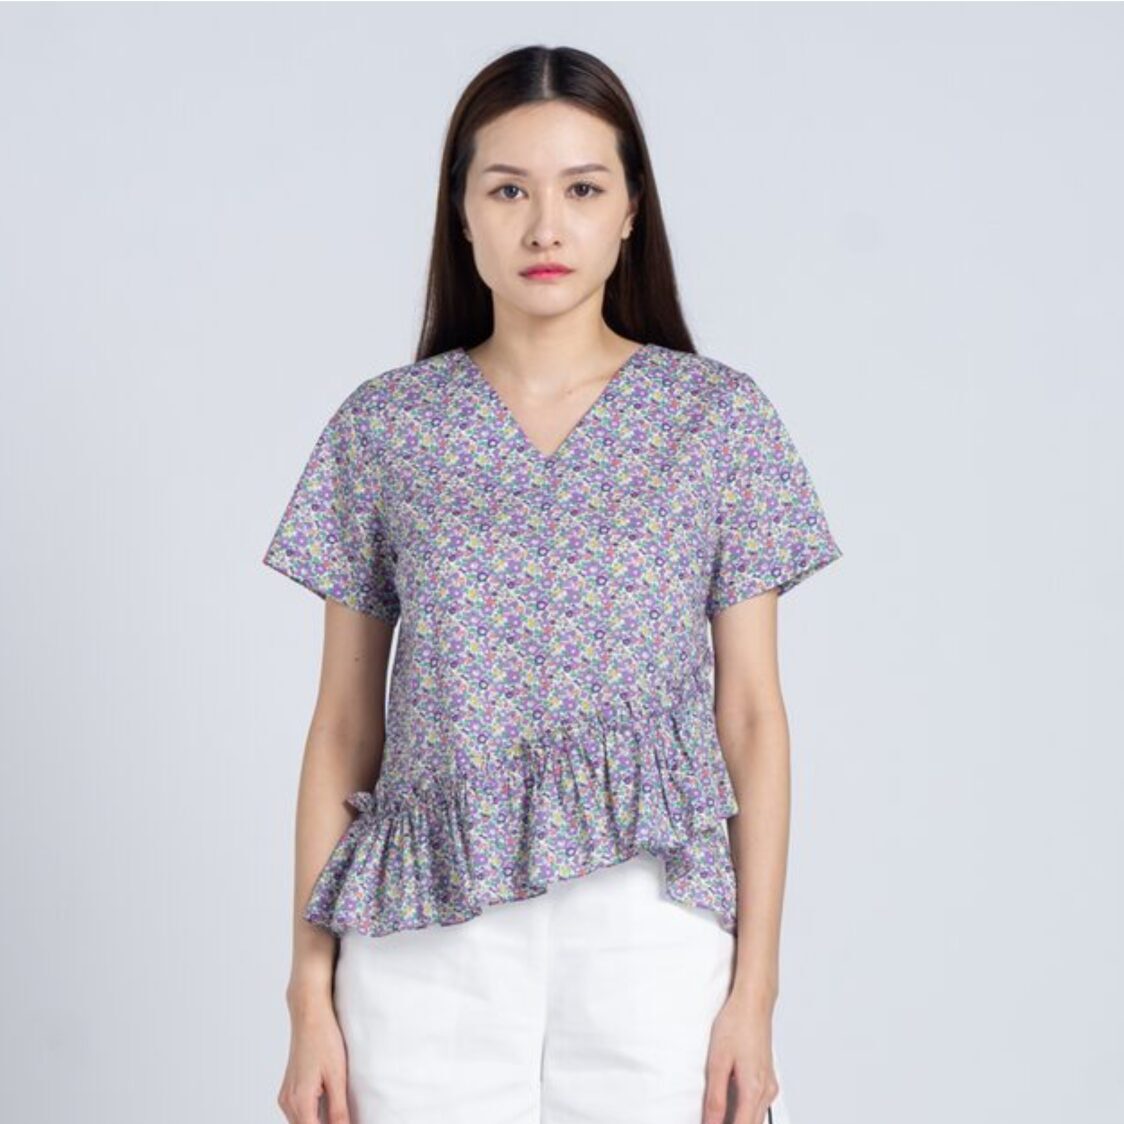 Kurt Woods Made With Liberty Fabric Short Sleeve Top Betsy Ann